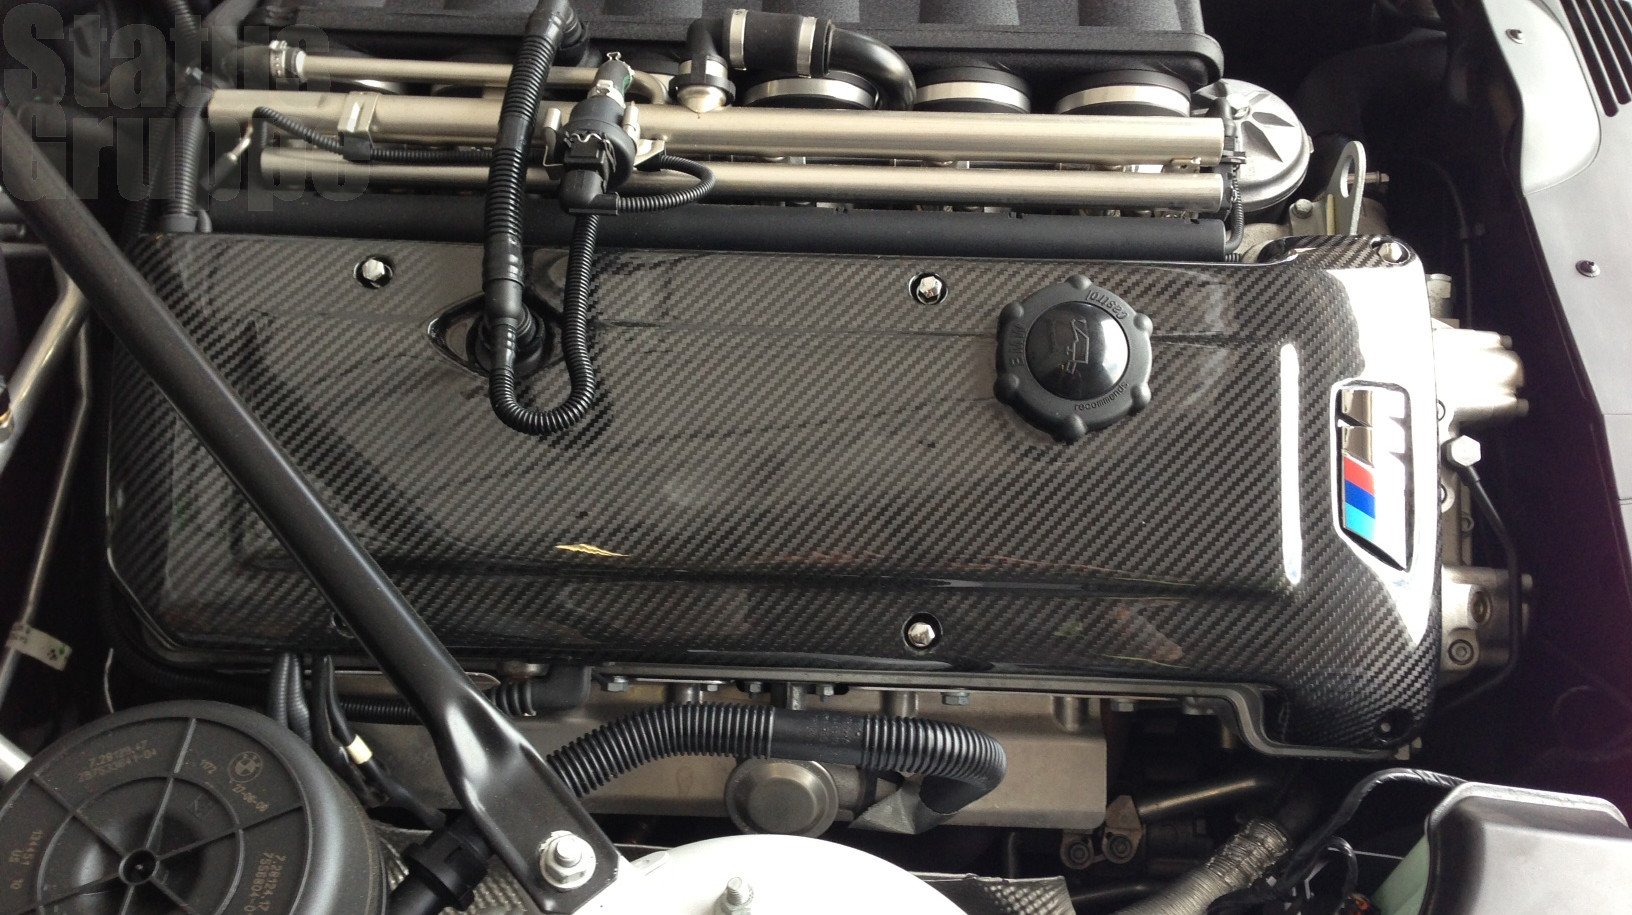 // Our SGT Carbon fiber S54 Engine Cover is the perfect addition to any eng...